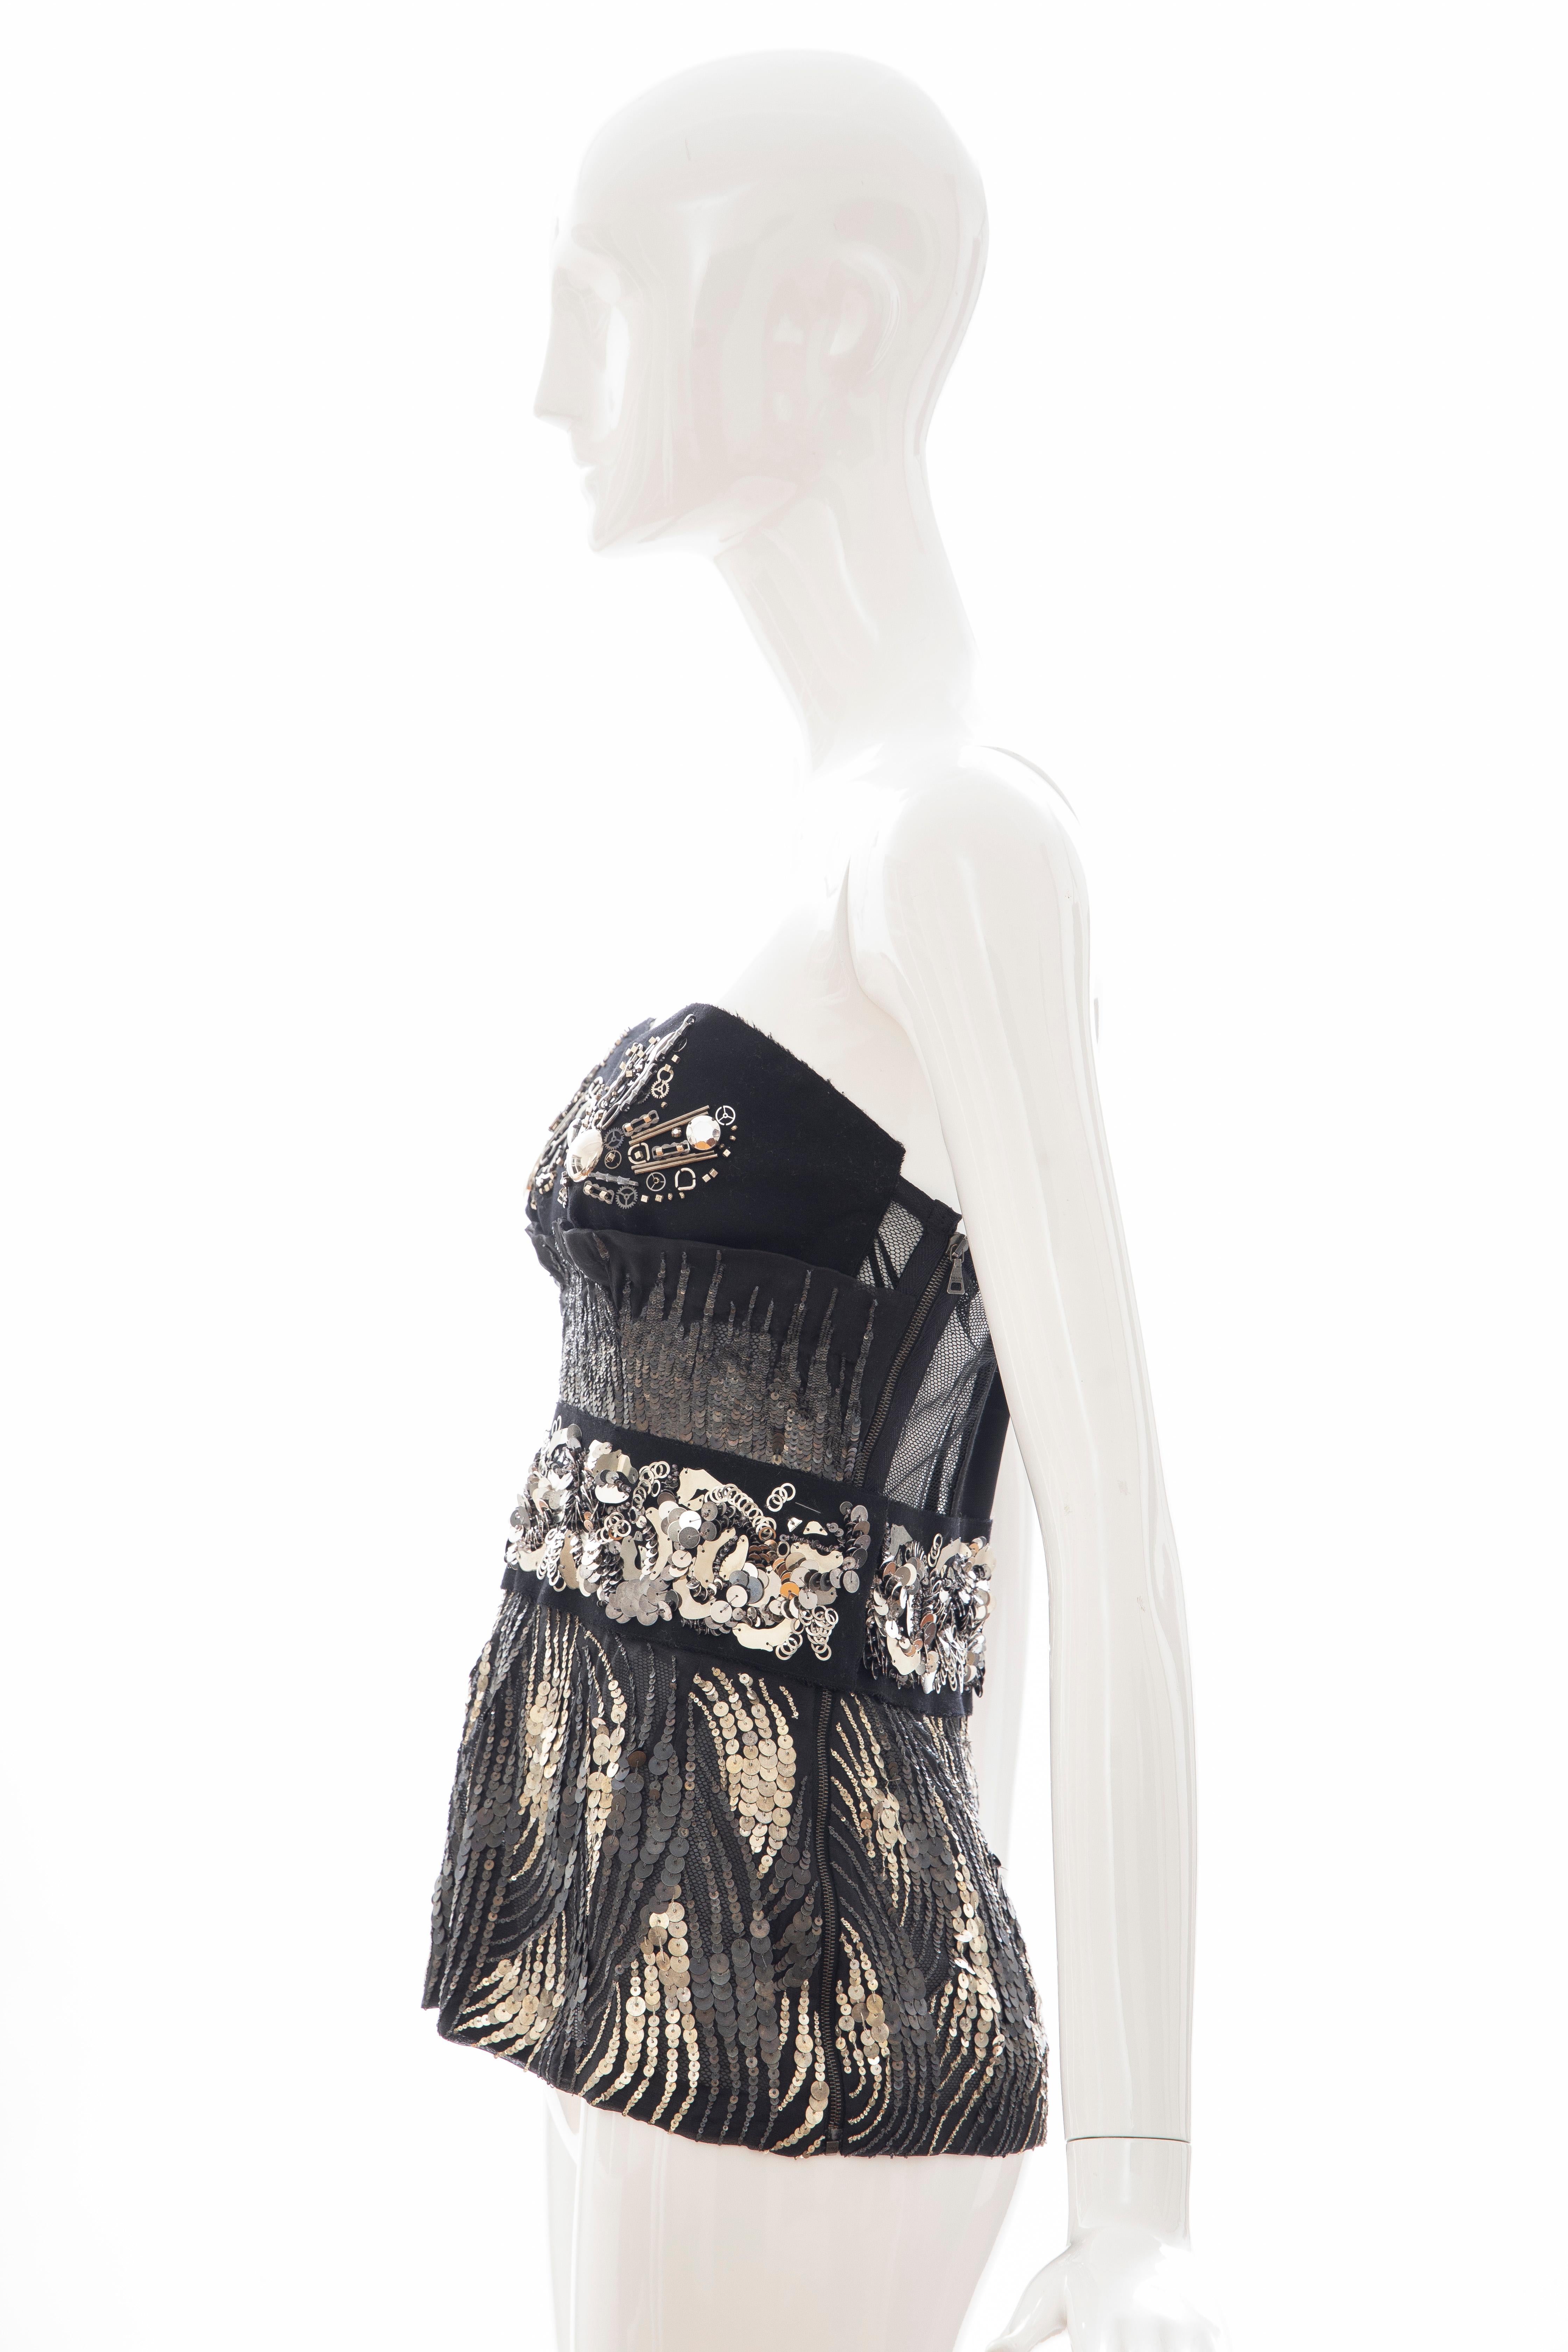 Prada Runway Black Strapless Embroidered Sequin Top, Fall 2006 For Sale 2